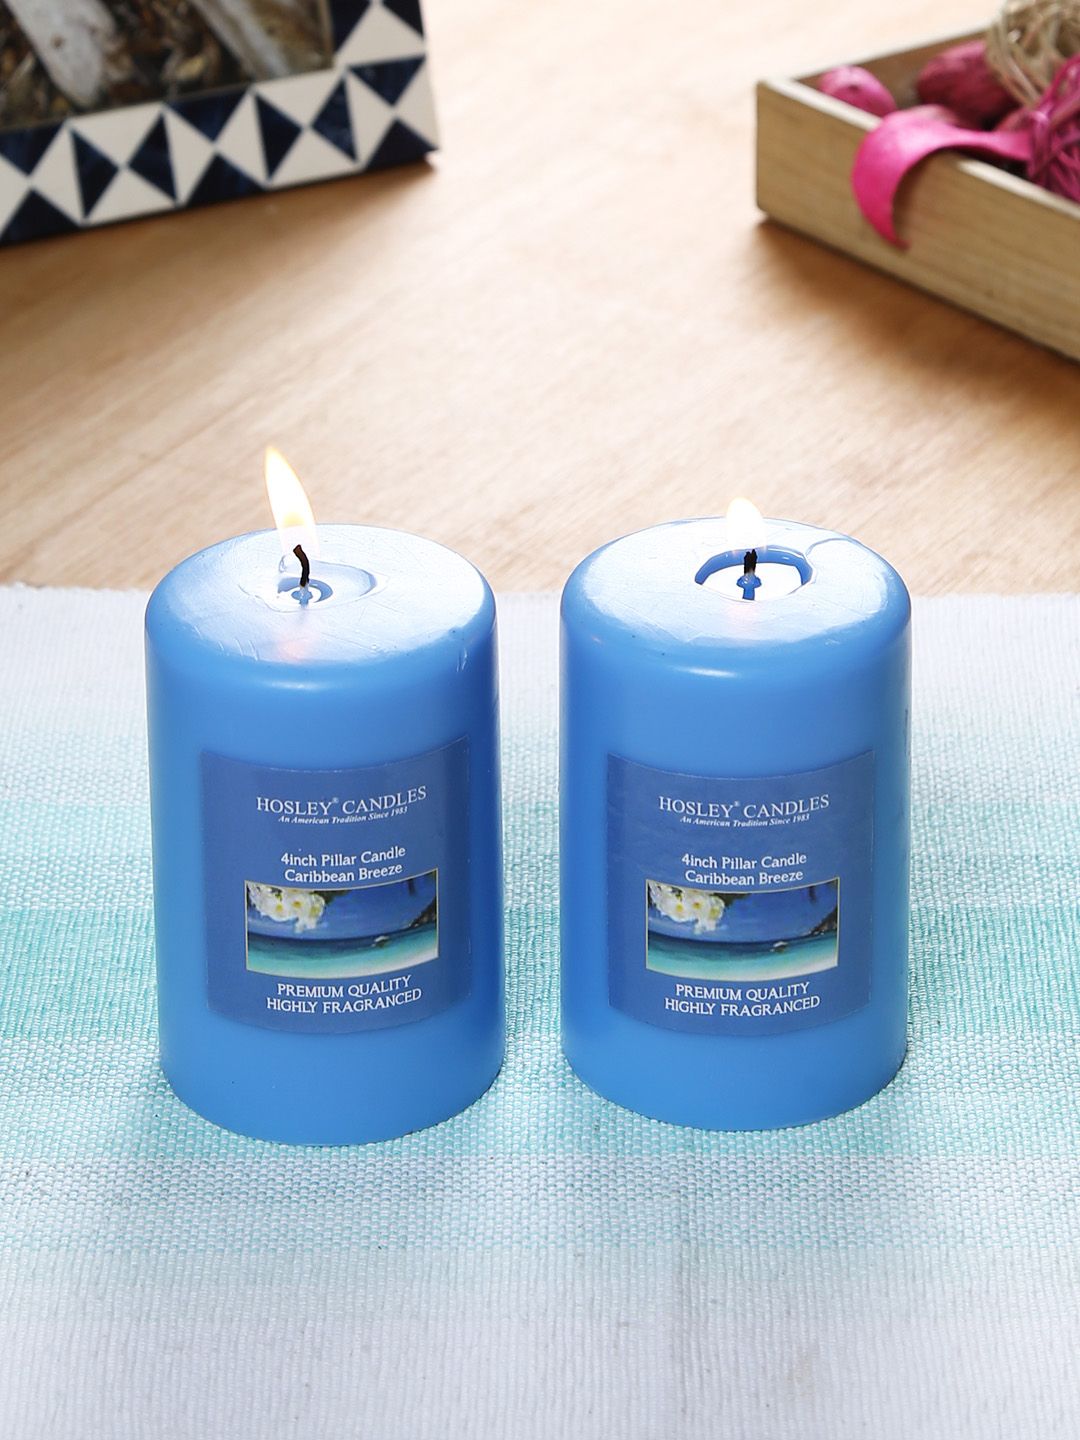 HOSLEY Set of 2 Blue Caribbean Breeze Fragranced Wax Pillar Candles Price in India